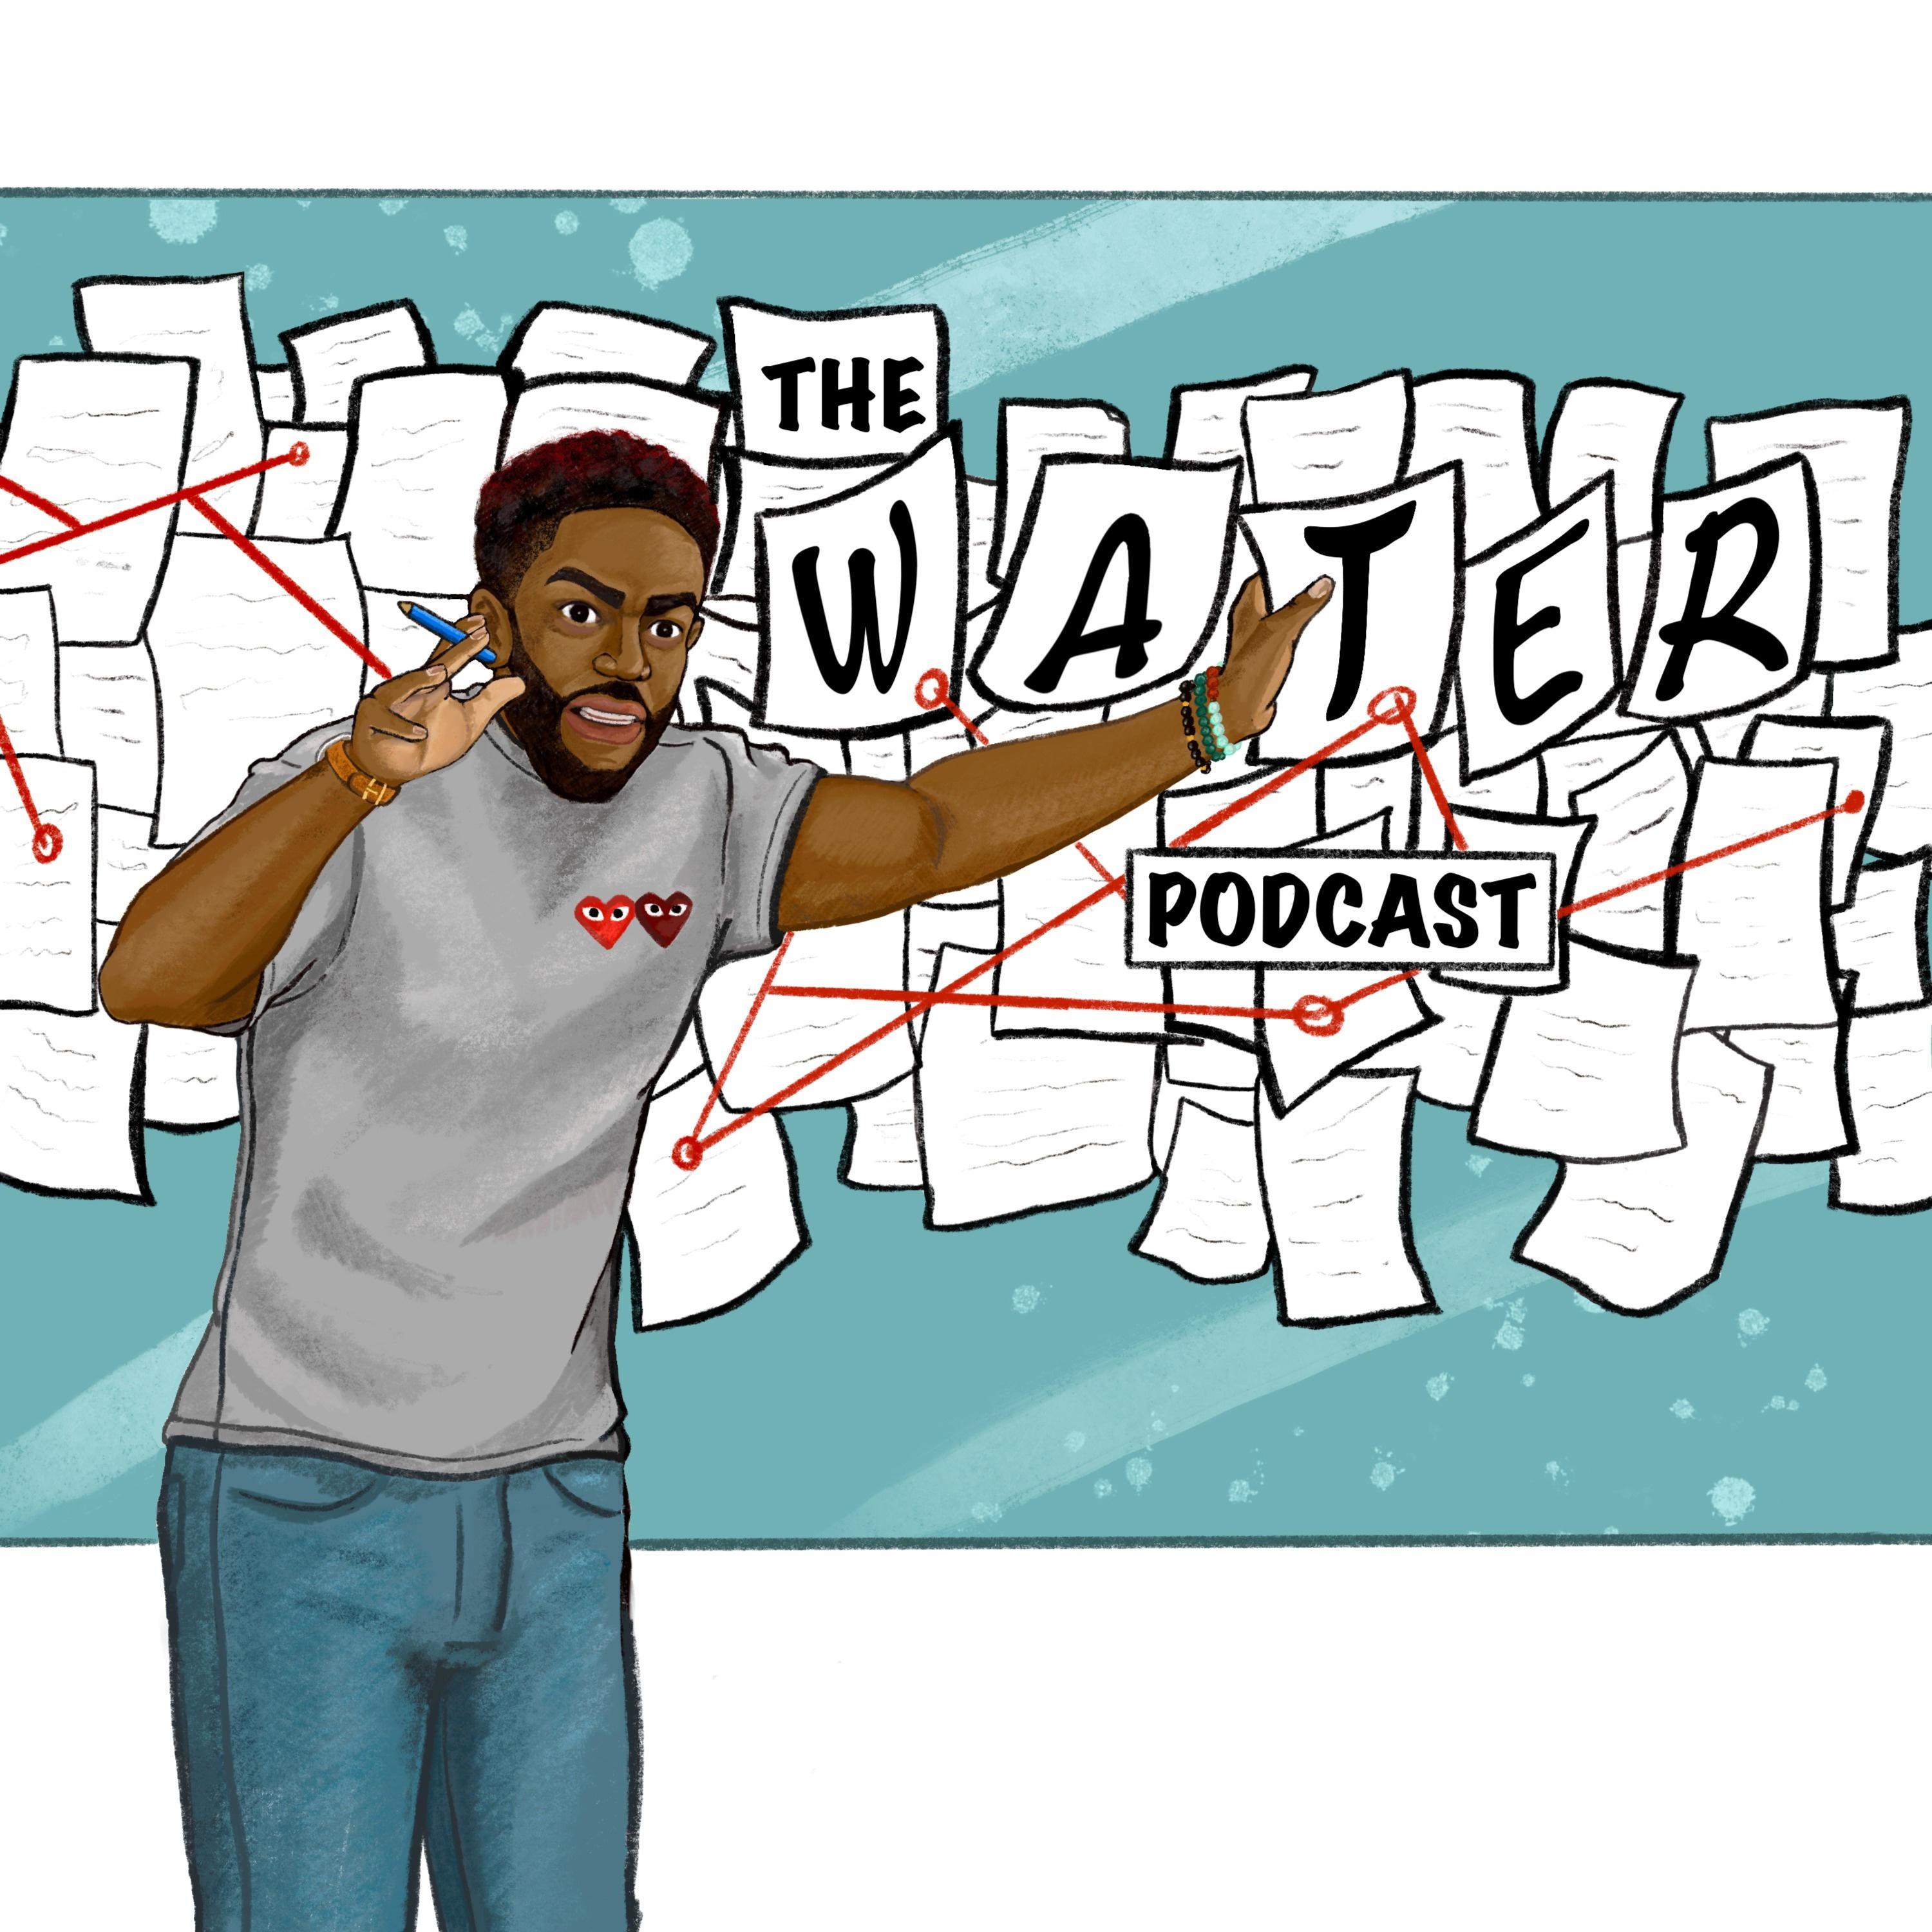 The Water Podcast